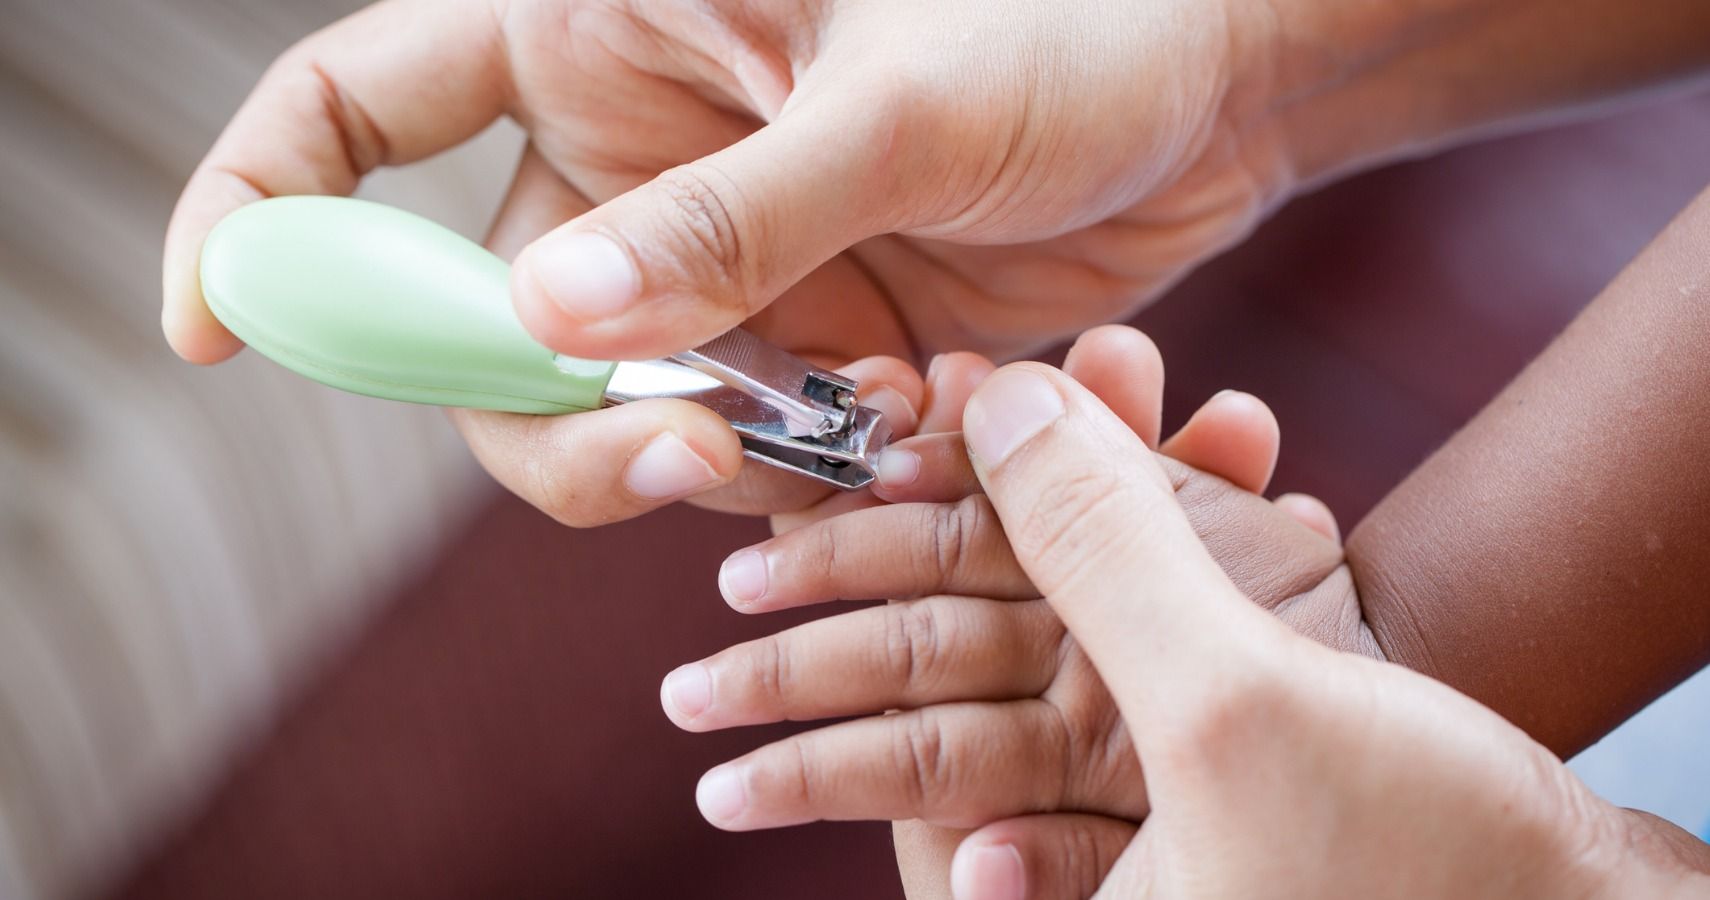 when to cut a baby's fingernails